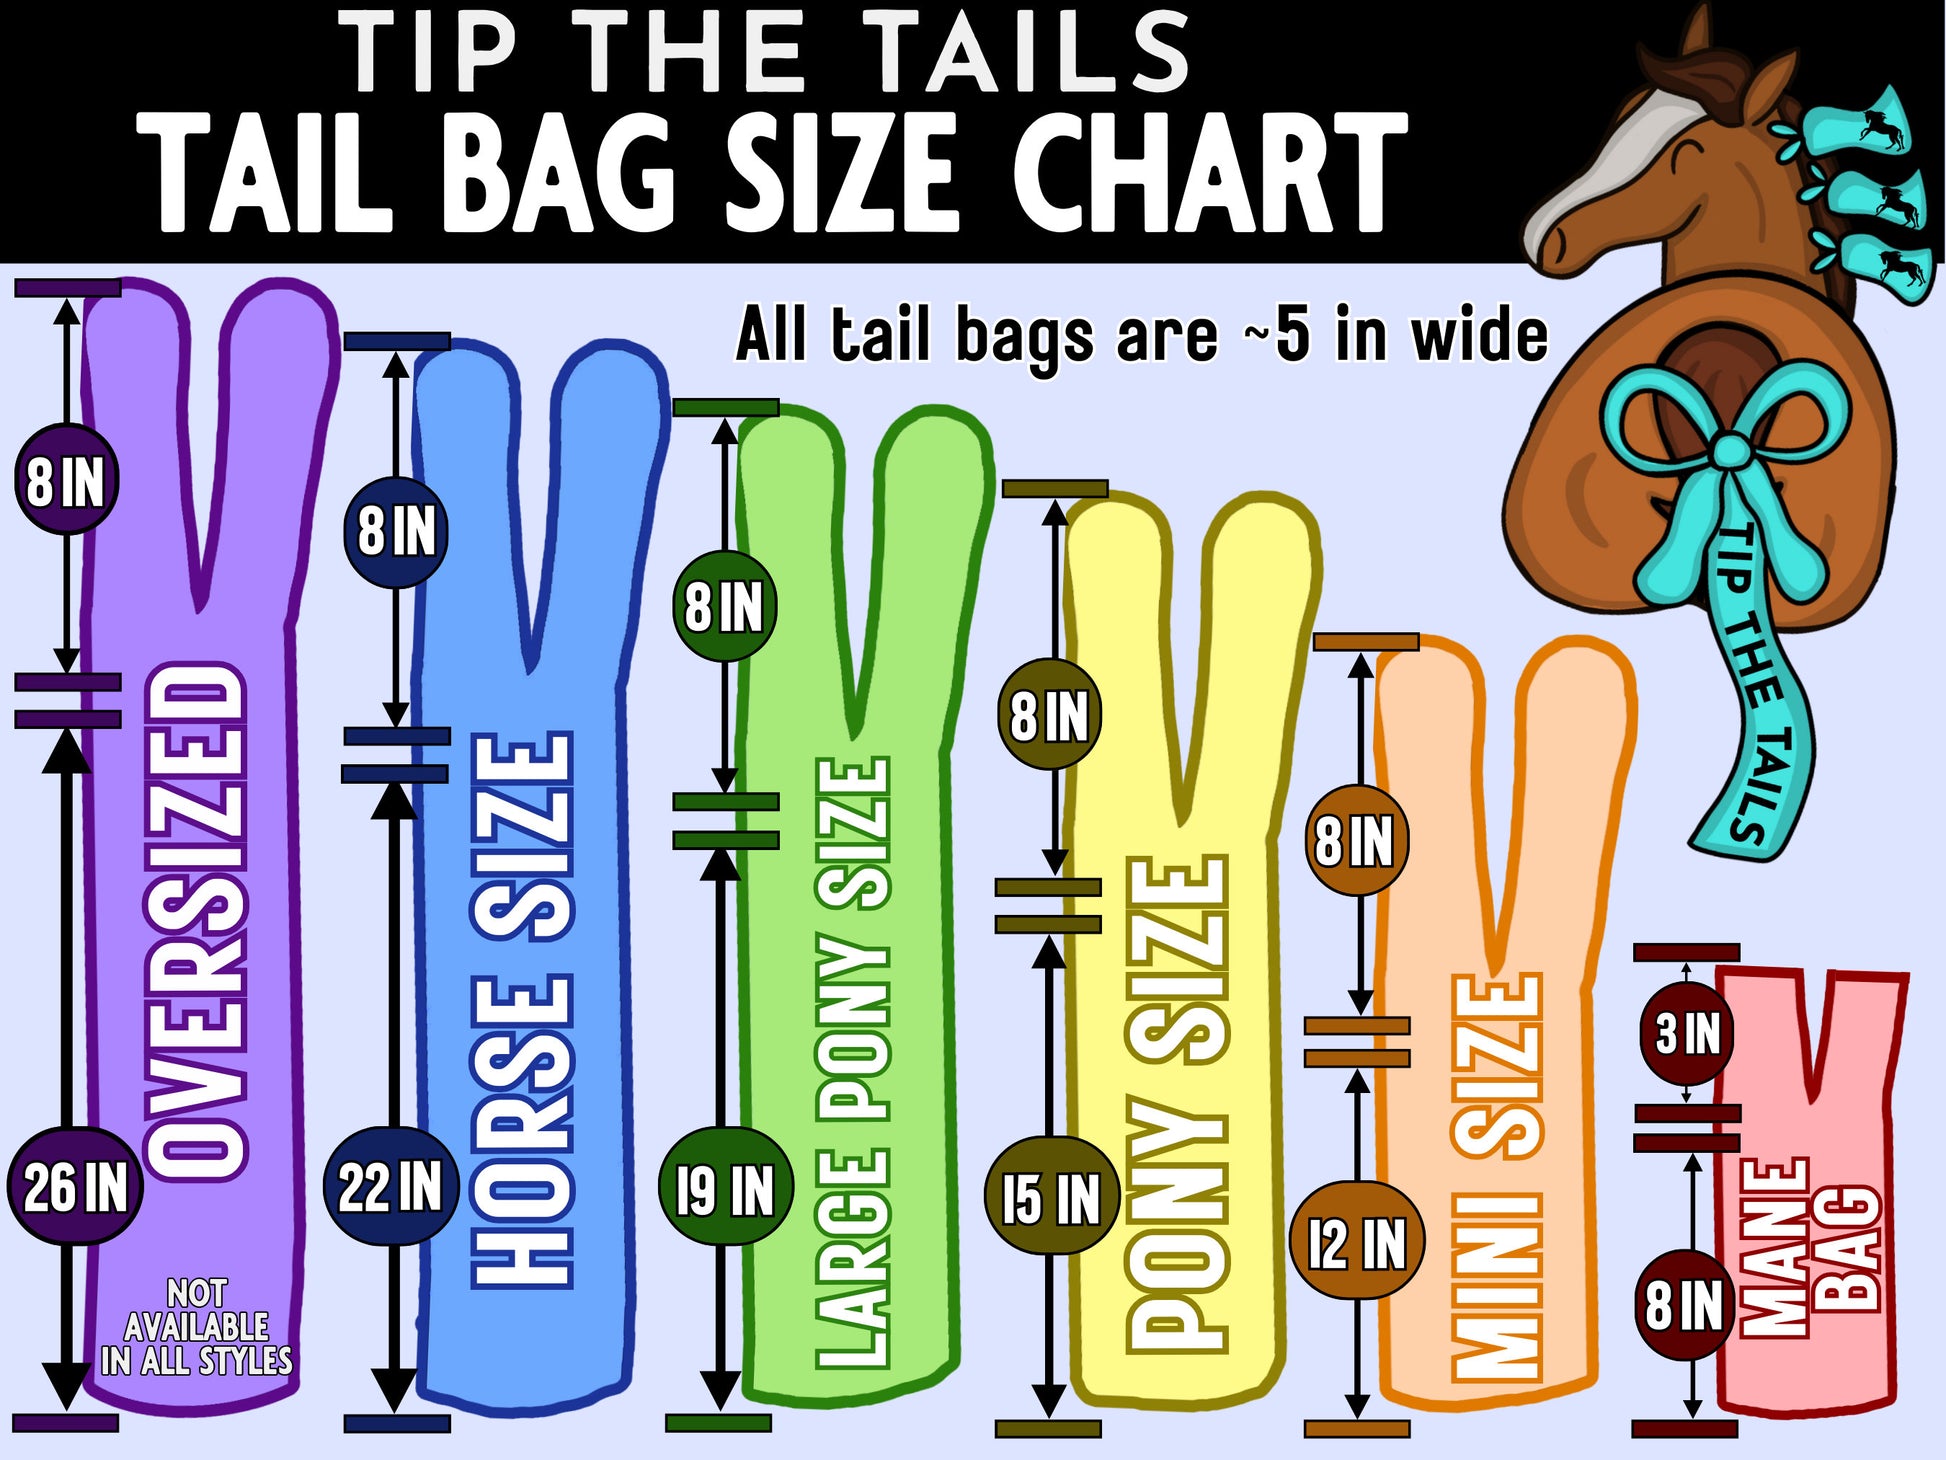 Pineapple Equine Tail Bag-Tip The Tails